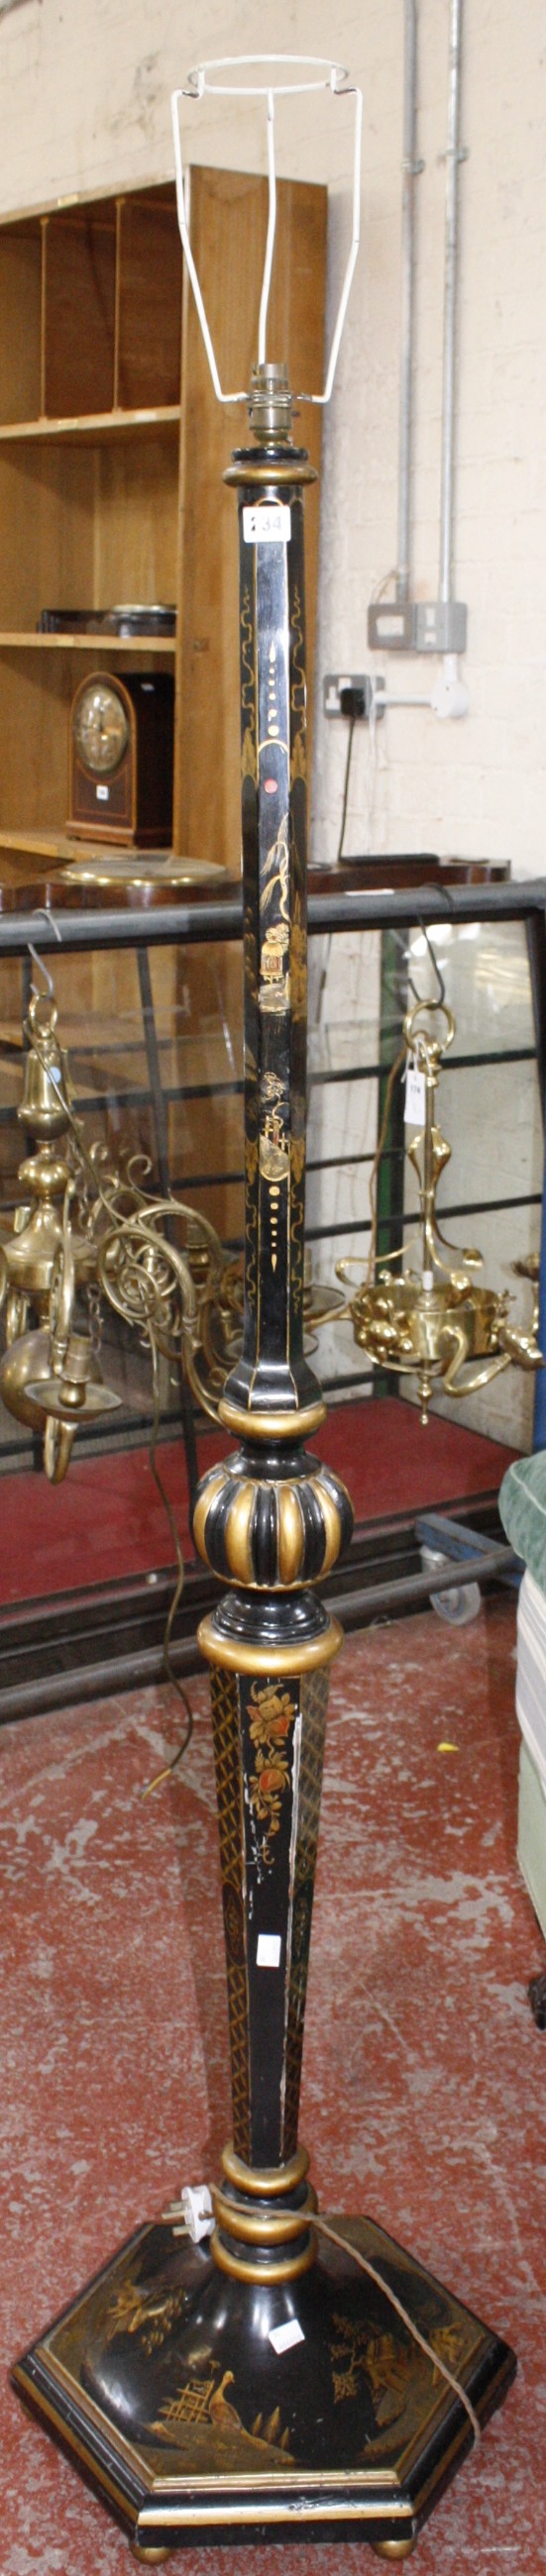 A Japanned and gilt decorated standard lamp (sold as parts)